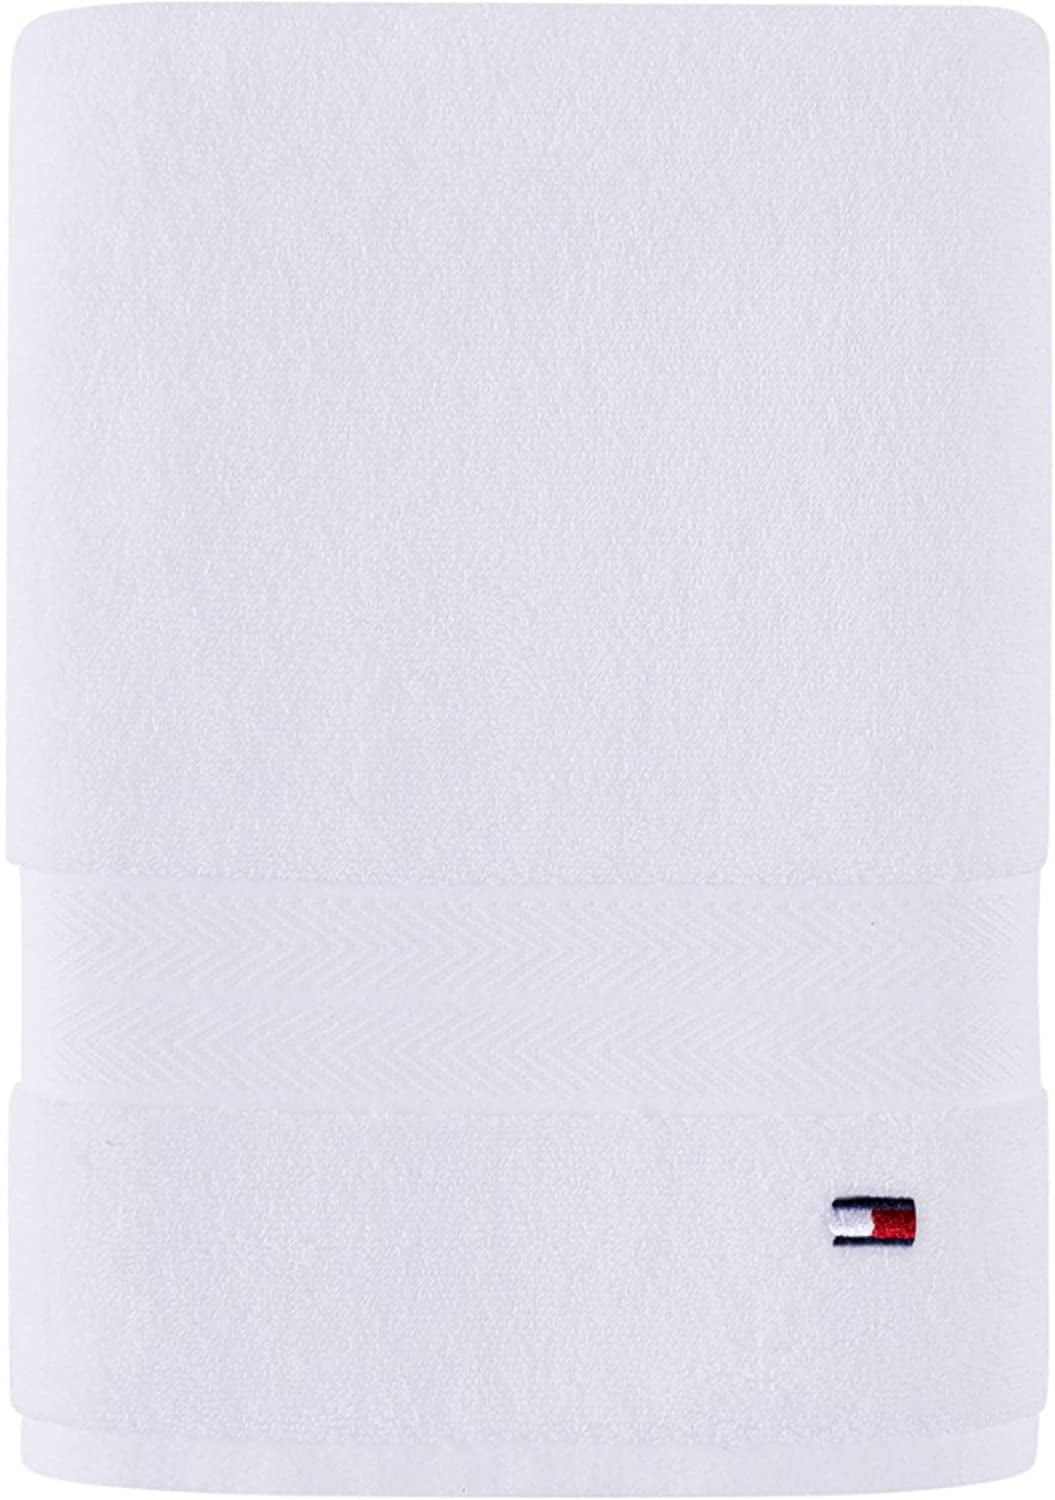 NEW One Tommy Hilfiger Bath Towel 100% Cotton 30 X 54 Various